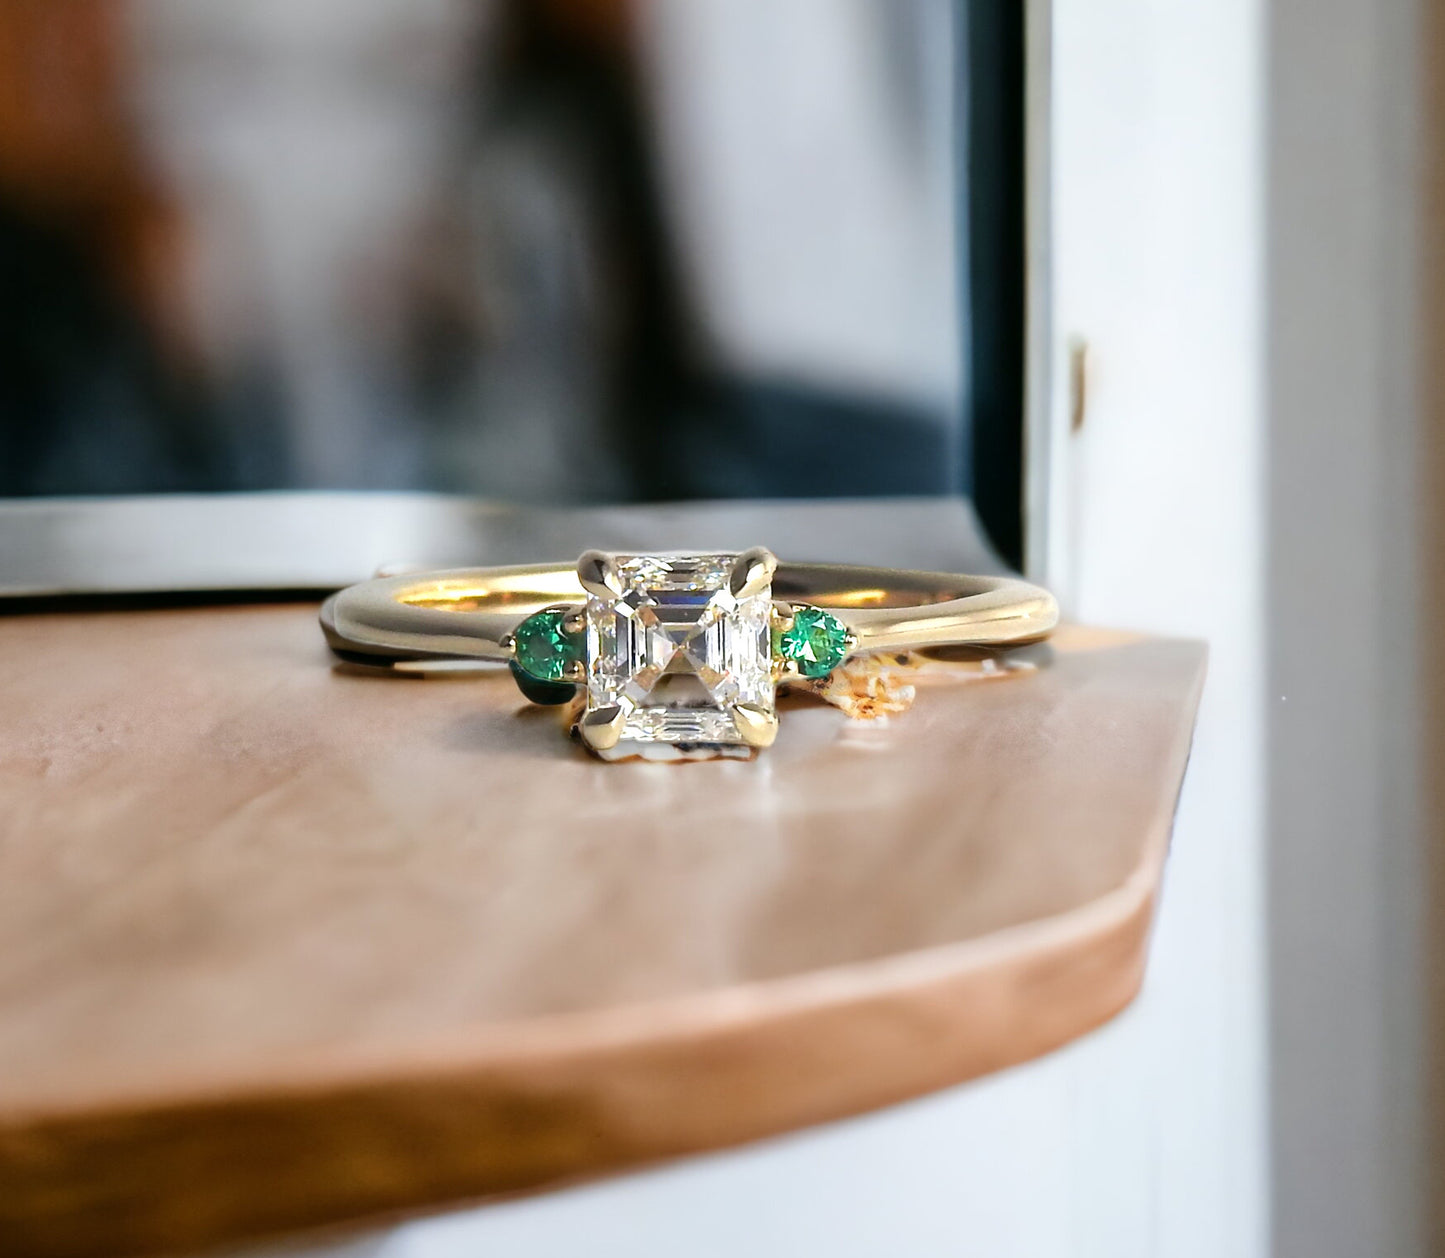 Bespoke engagement ring with an asscher cut diamond and accent emeralds in 14kt yellow gold, by ZEALmetal, Nicole Horlor, in Kingston, ON, Canada